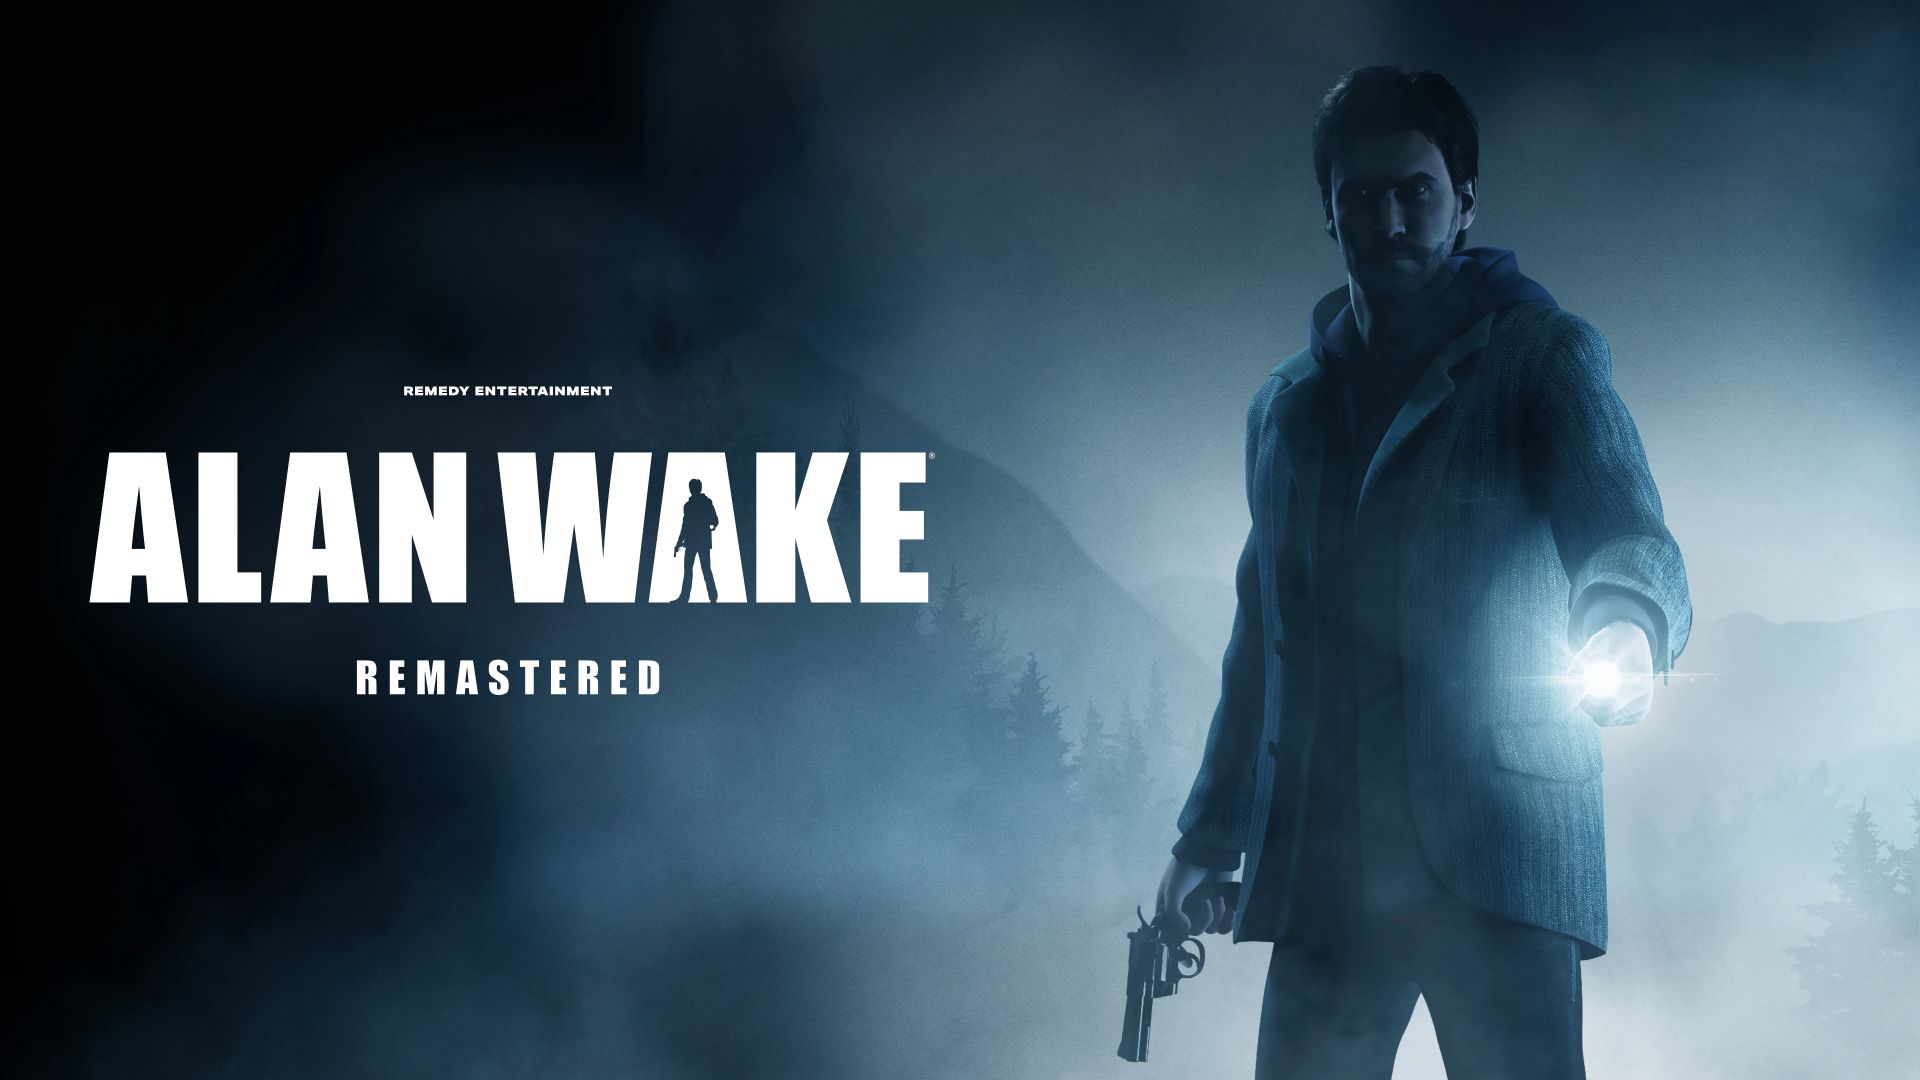 Alan Wake 2 PC minimum & recommended specs confirmed